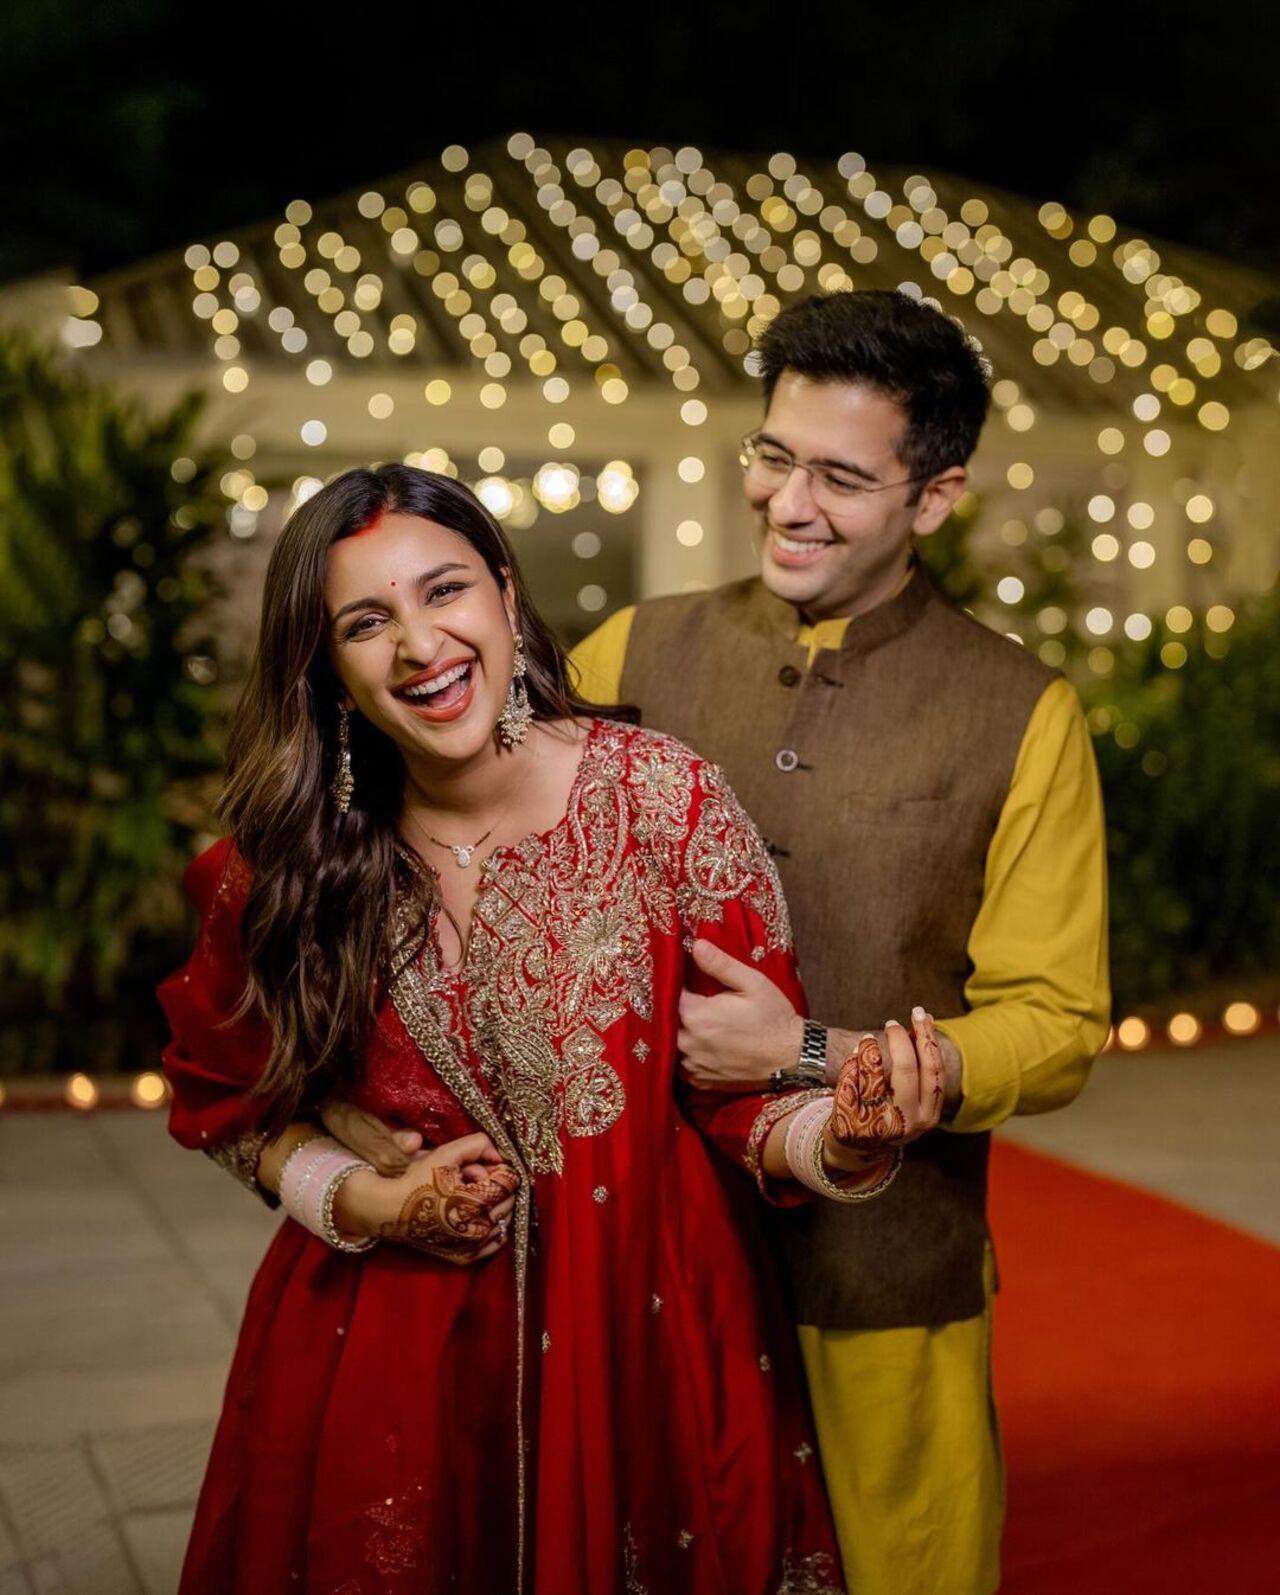 This was Parineeti Chopra and Raghav Chadha's first Karwa Chauth together after their wedding in September